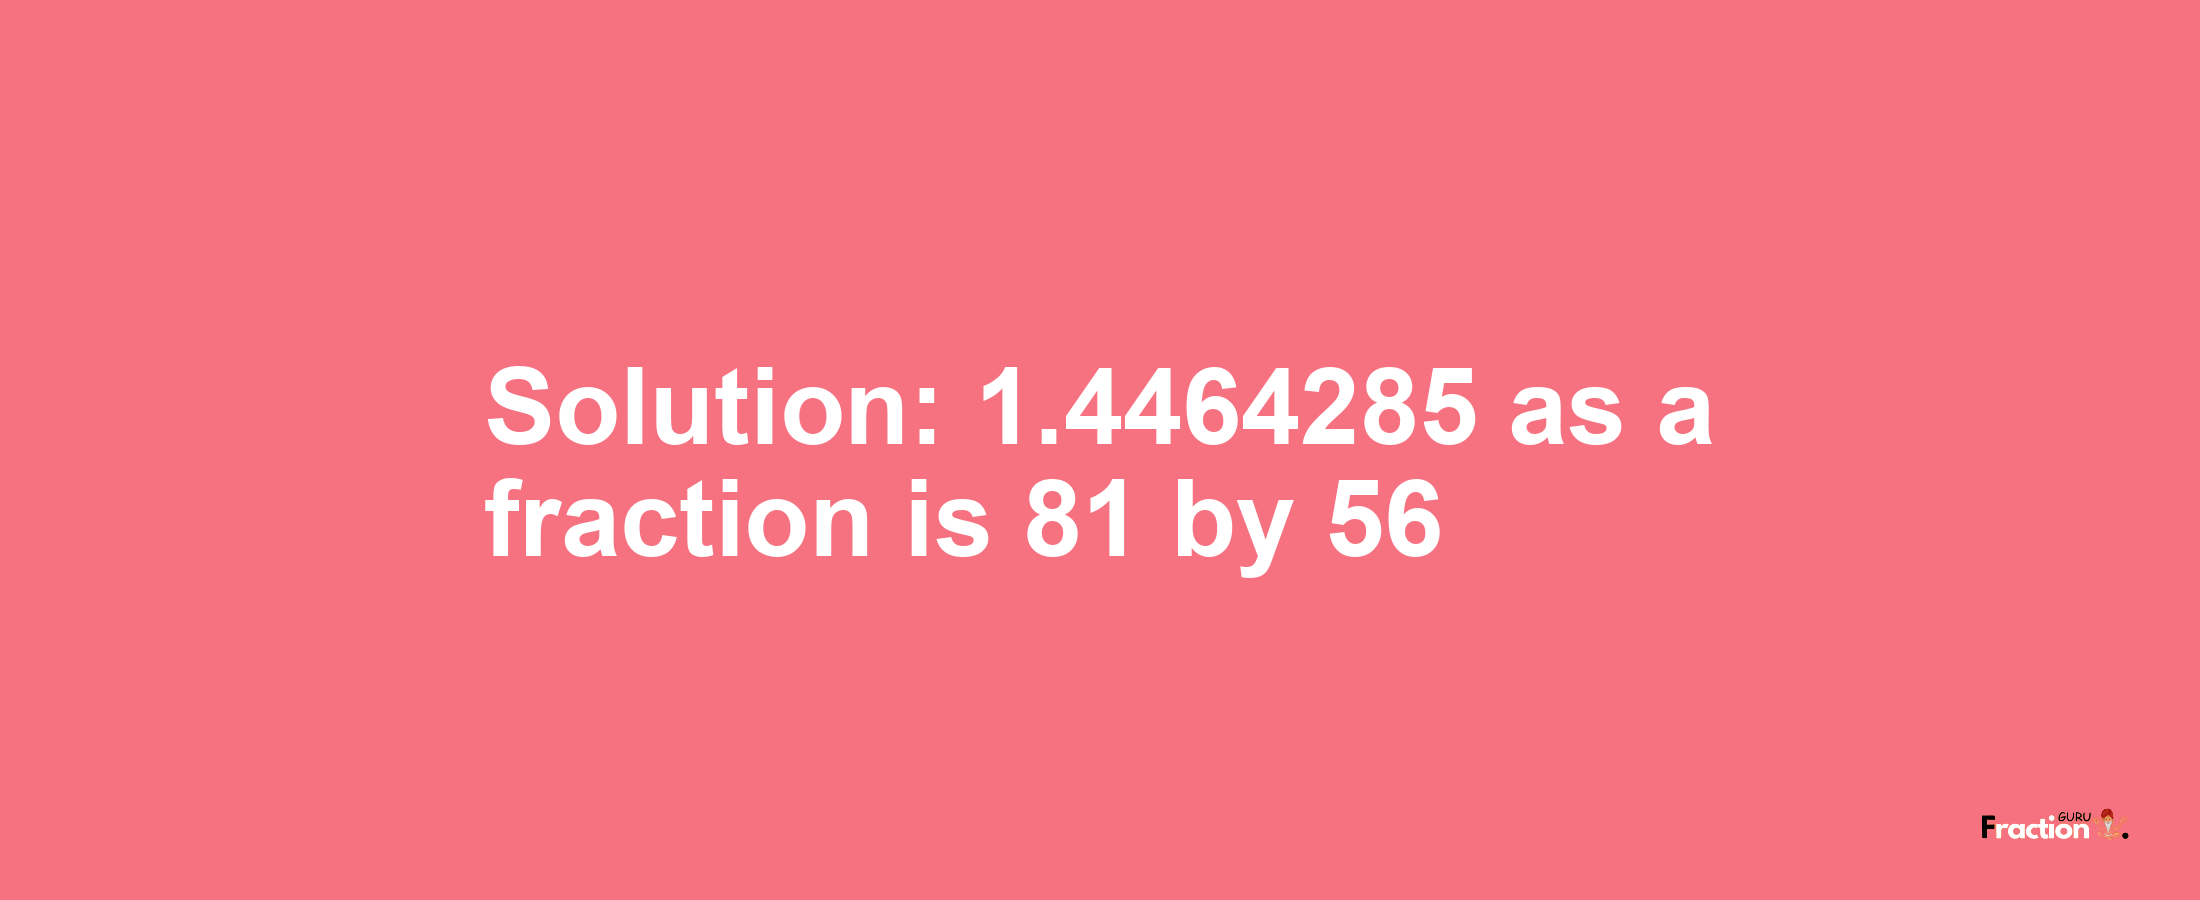 Solution:1.4464285 as a fraction is 81/56